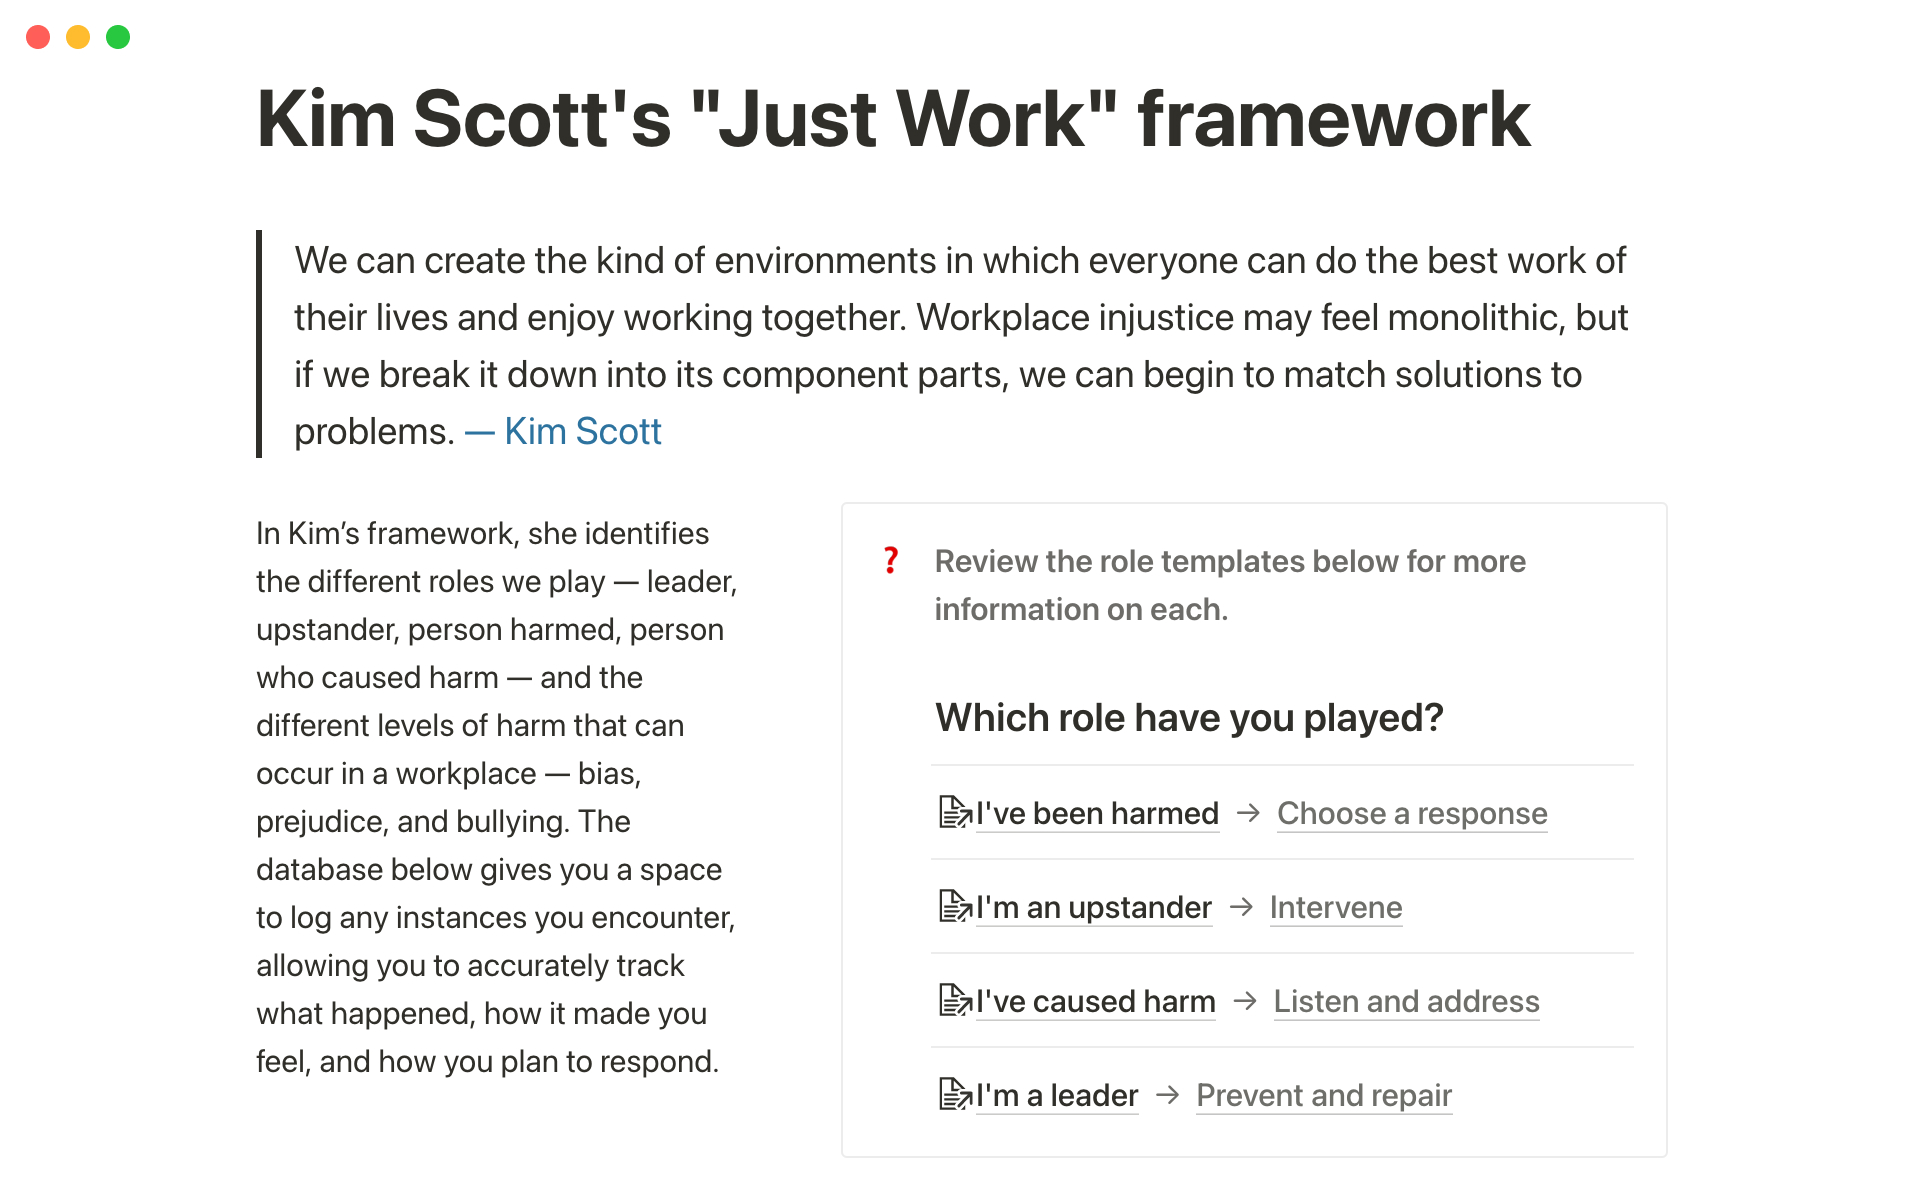 Use Kim Scott's Just Work template to quickly record instances of workplace injustice and respond based on the role you played.